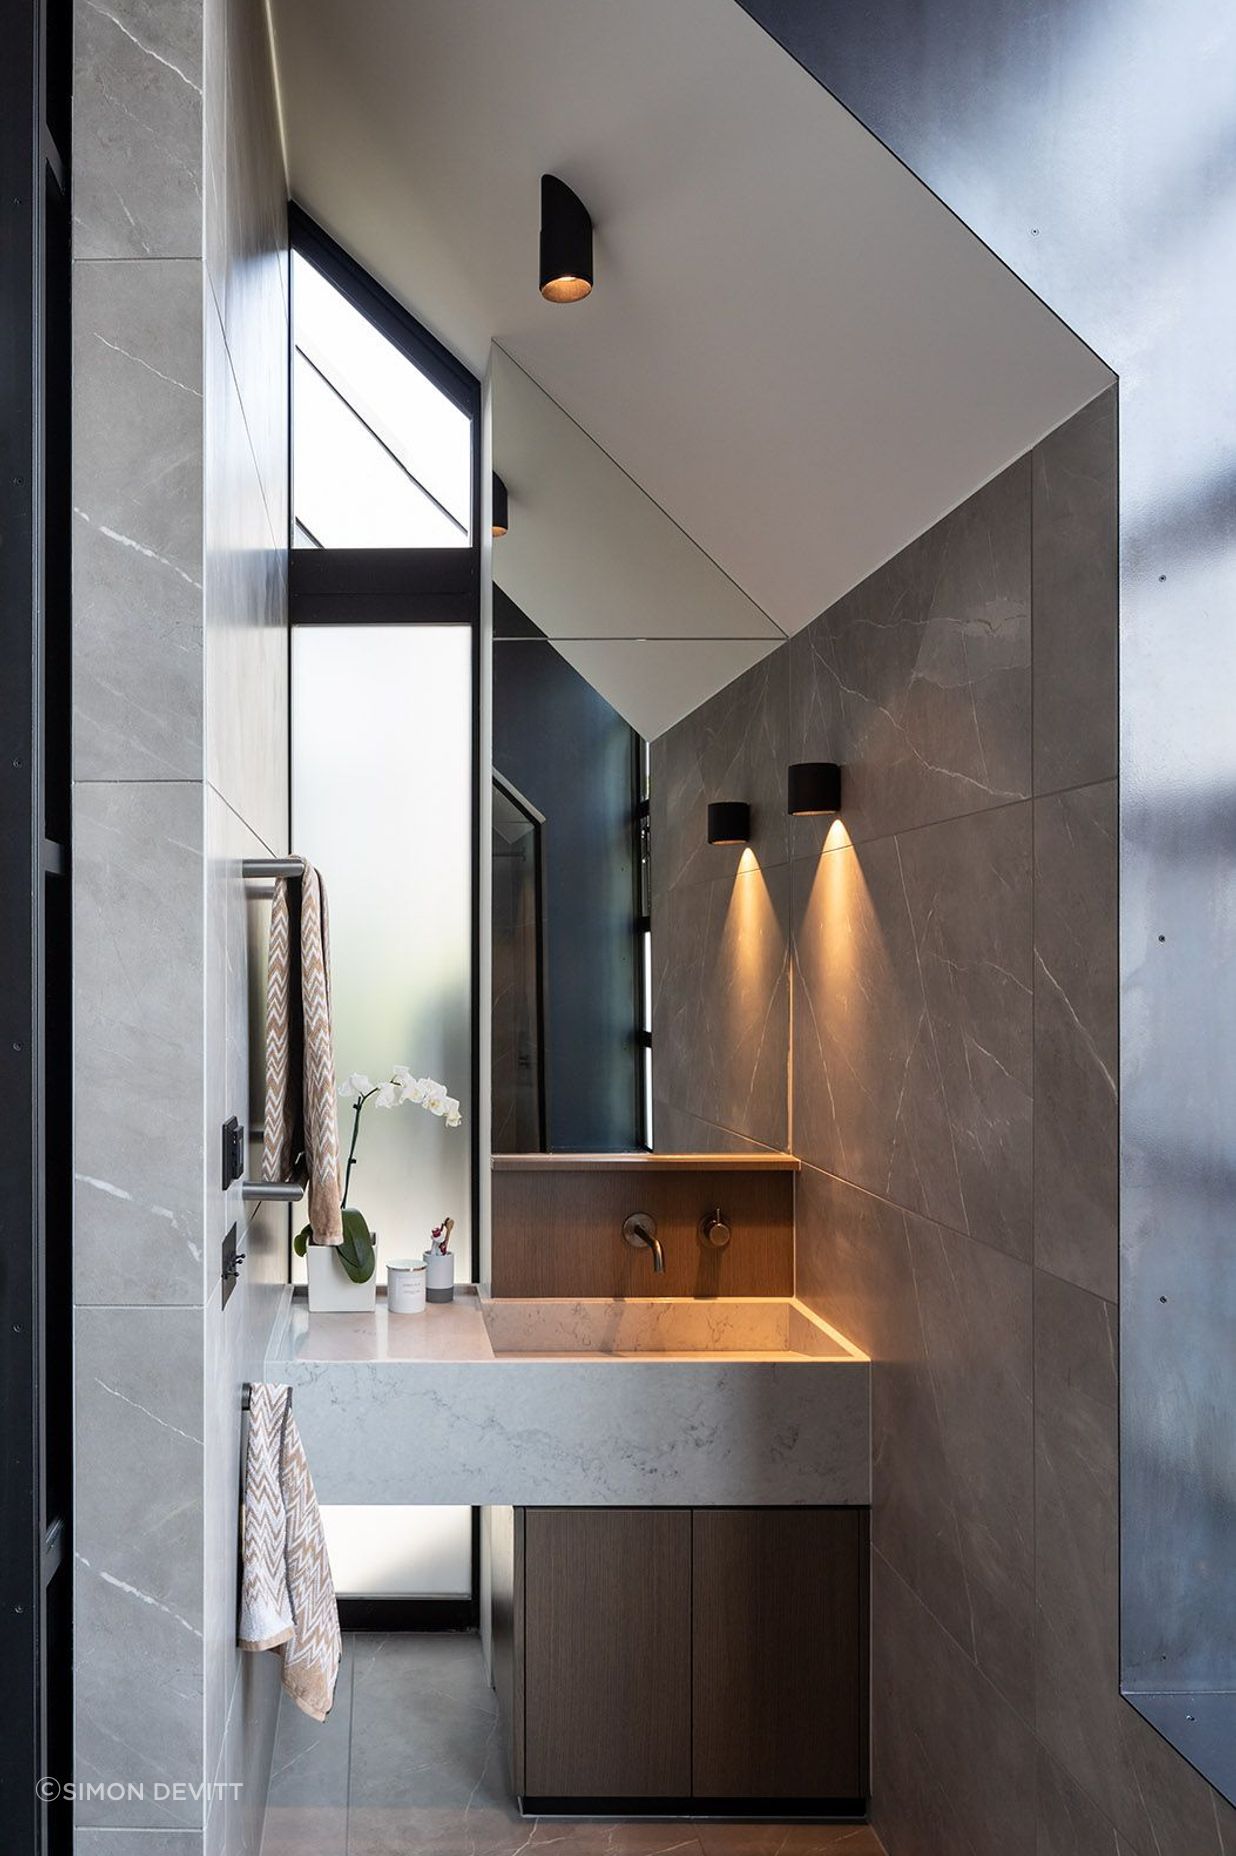 The ensuite bathroom is defined by the pitched roofline.